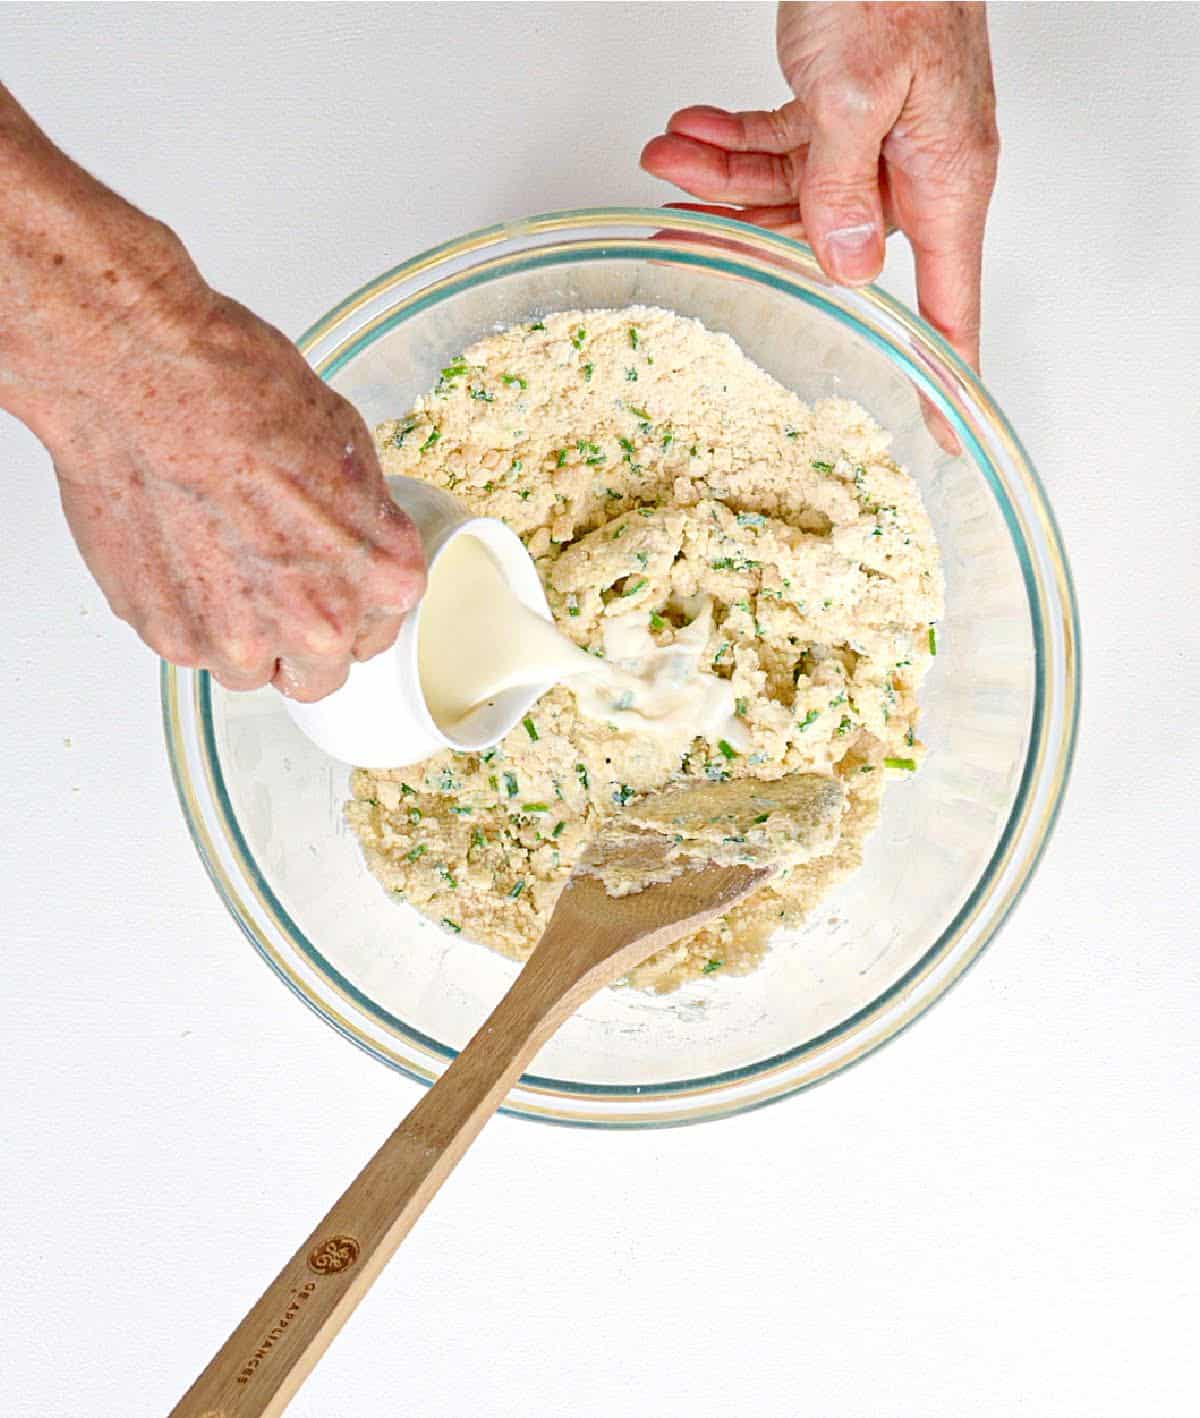 Adding milk to a glass bowl with cheese chive scone dough ingredients. White surface.